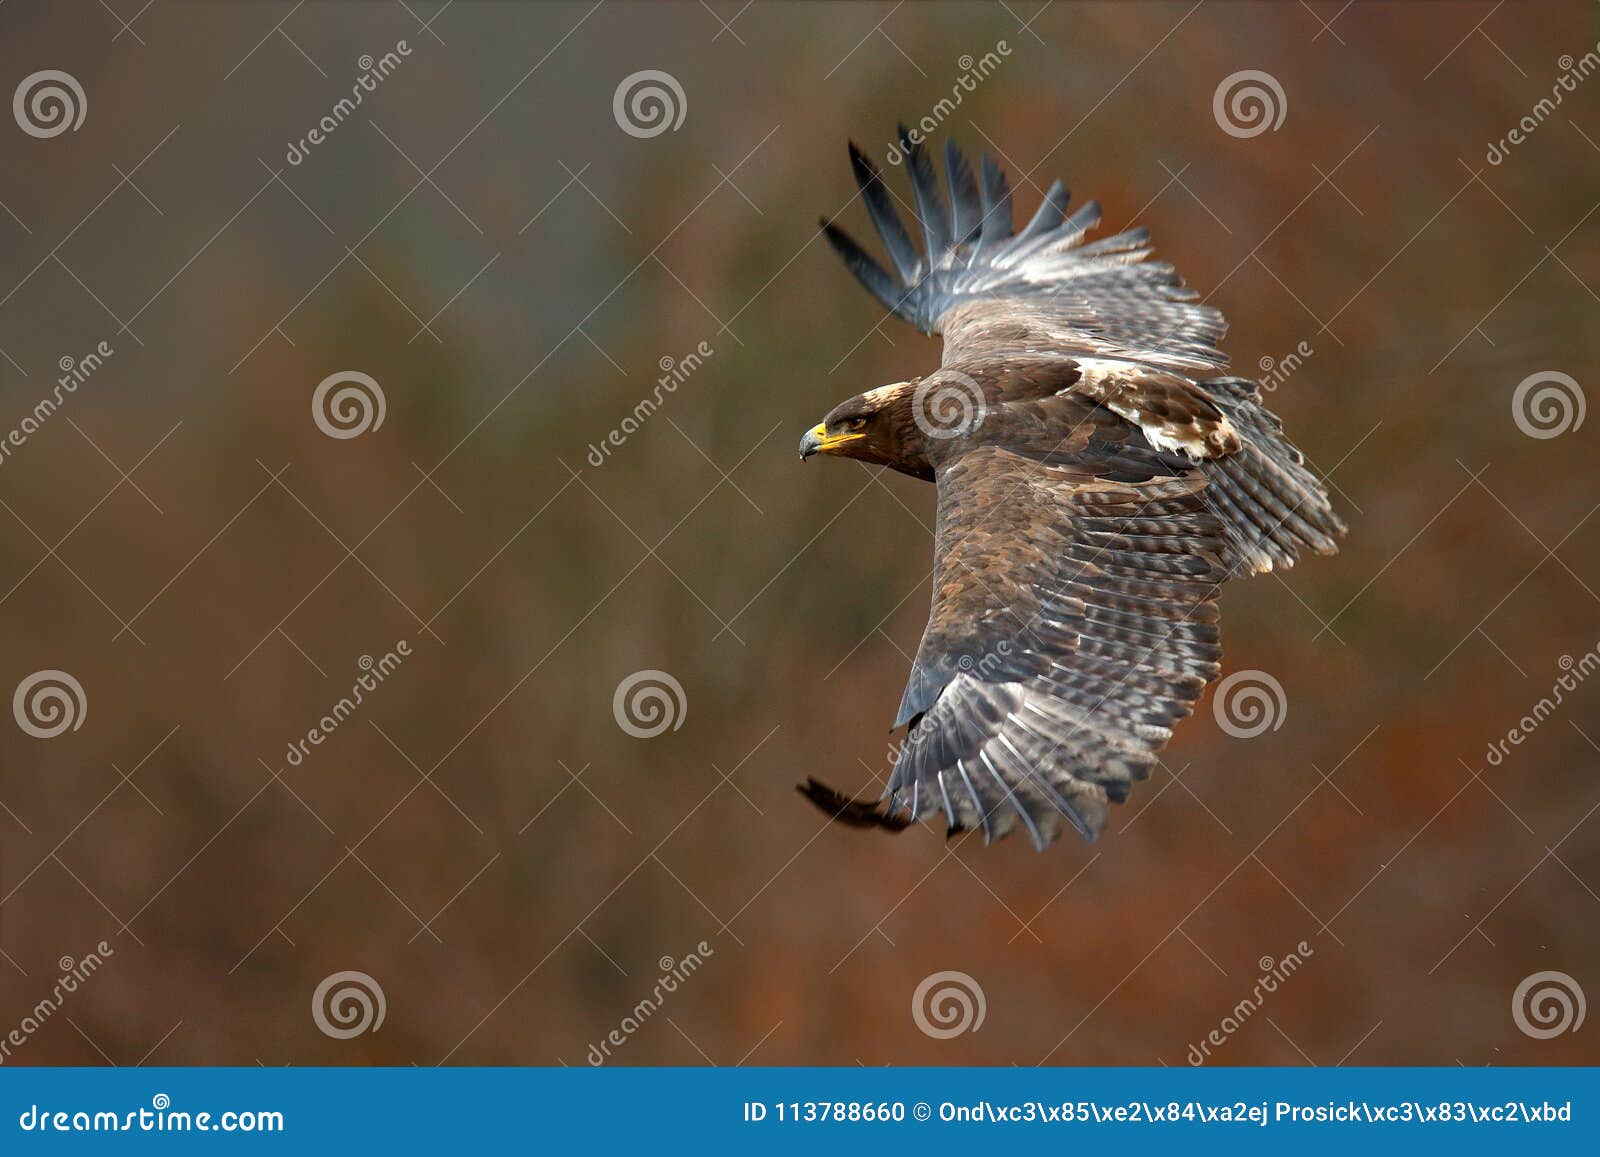 eagle in fly. flying dark brawn bird of prey steppe eagle, aquila nipalensis, with large wingspan. wildlife scene from nature. act